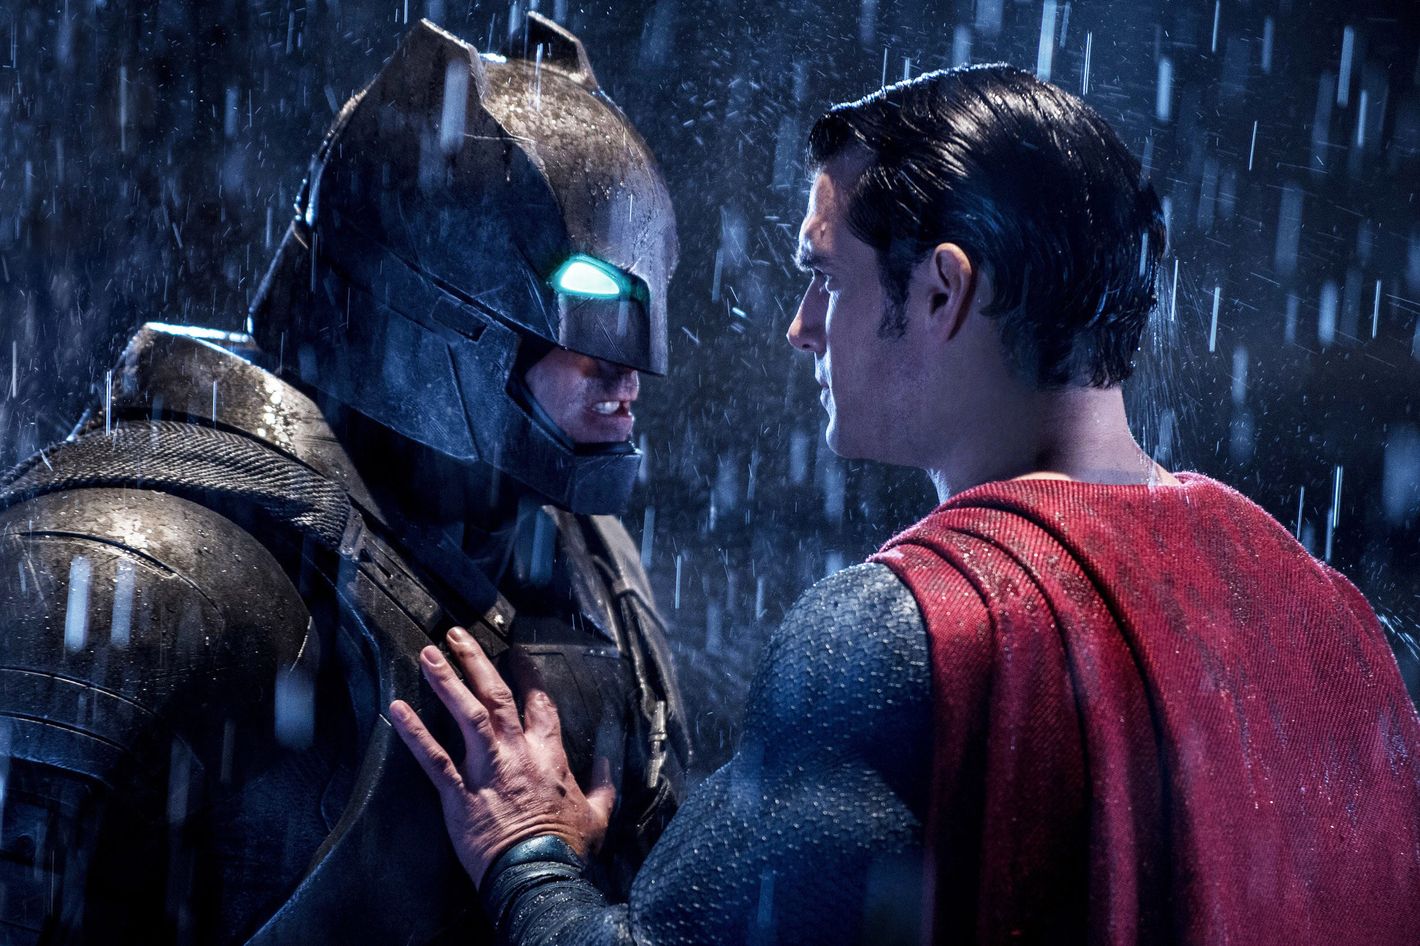 Report: Warner Bros. Switches Up Exec Responsibilities, Creates New Film  Division With Hopes of Preventing Another Batman v Superman Misstep